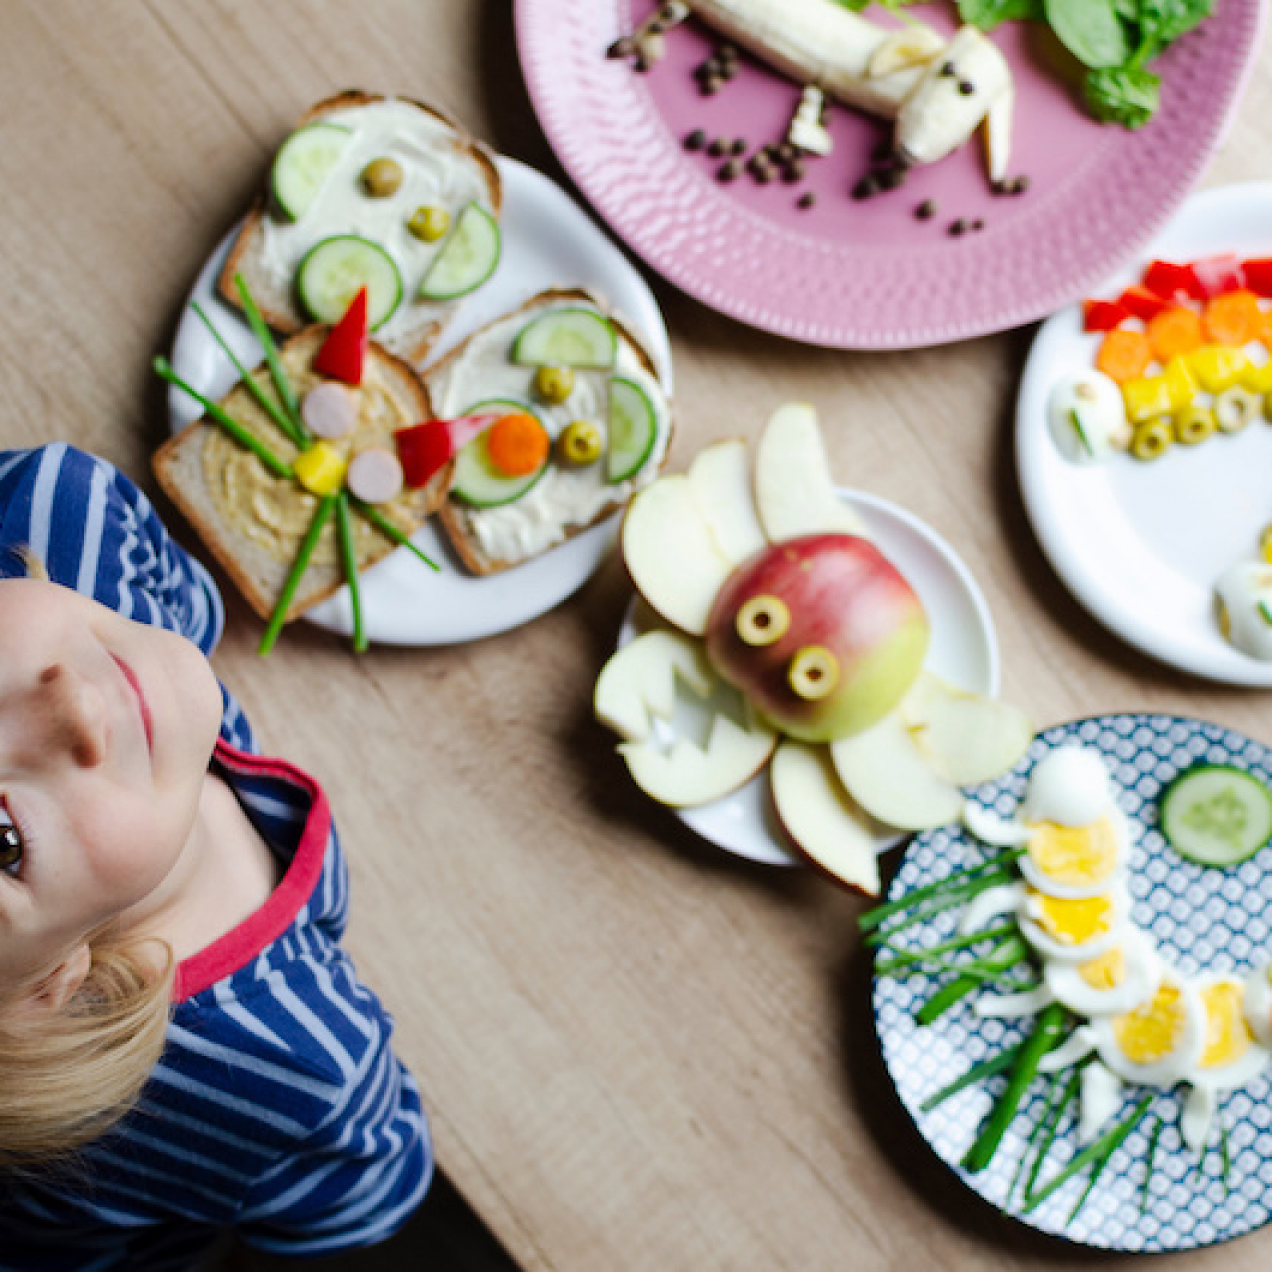 Creative ways to sneak vegetables into your child’s diet